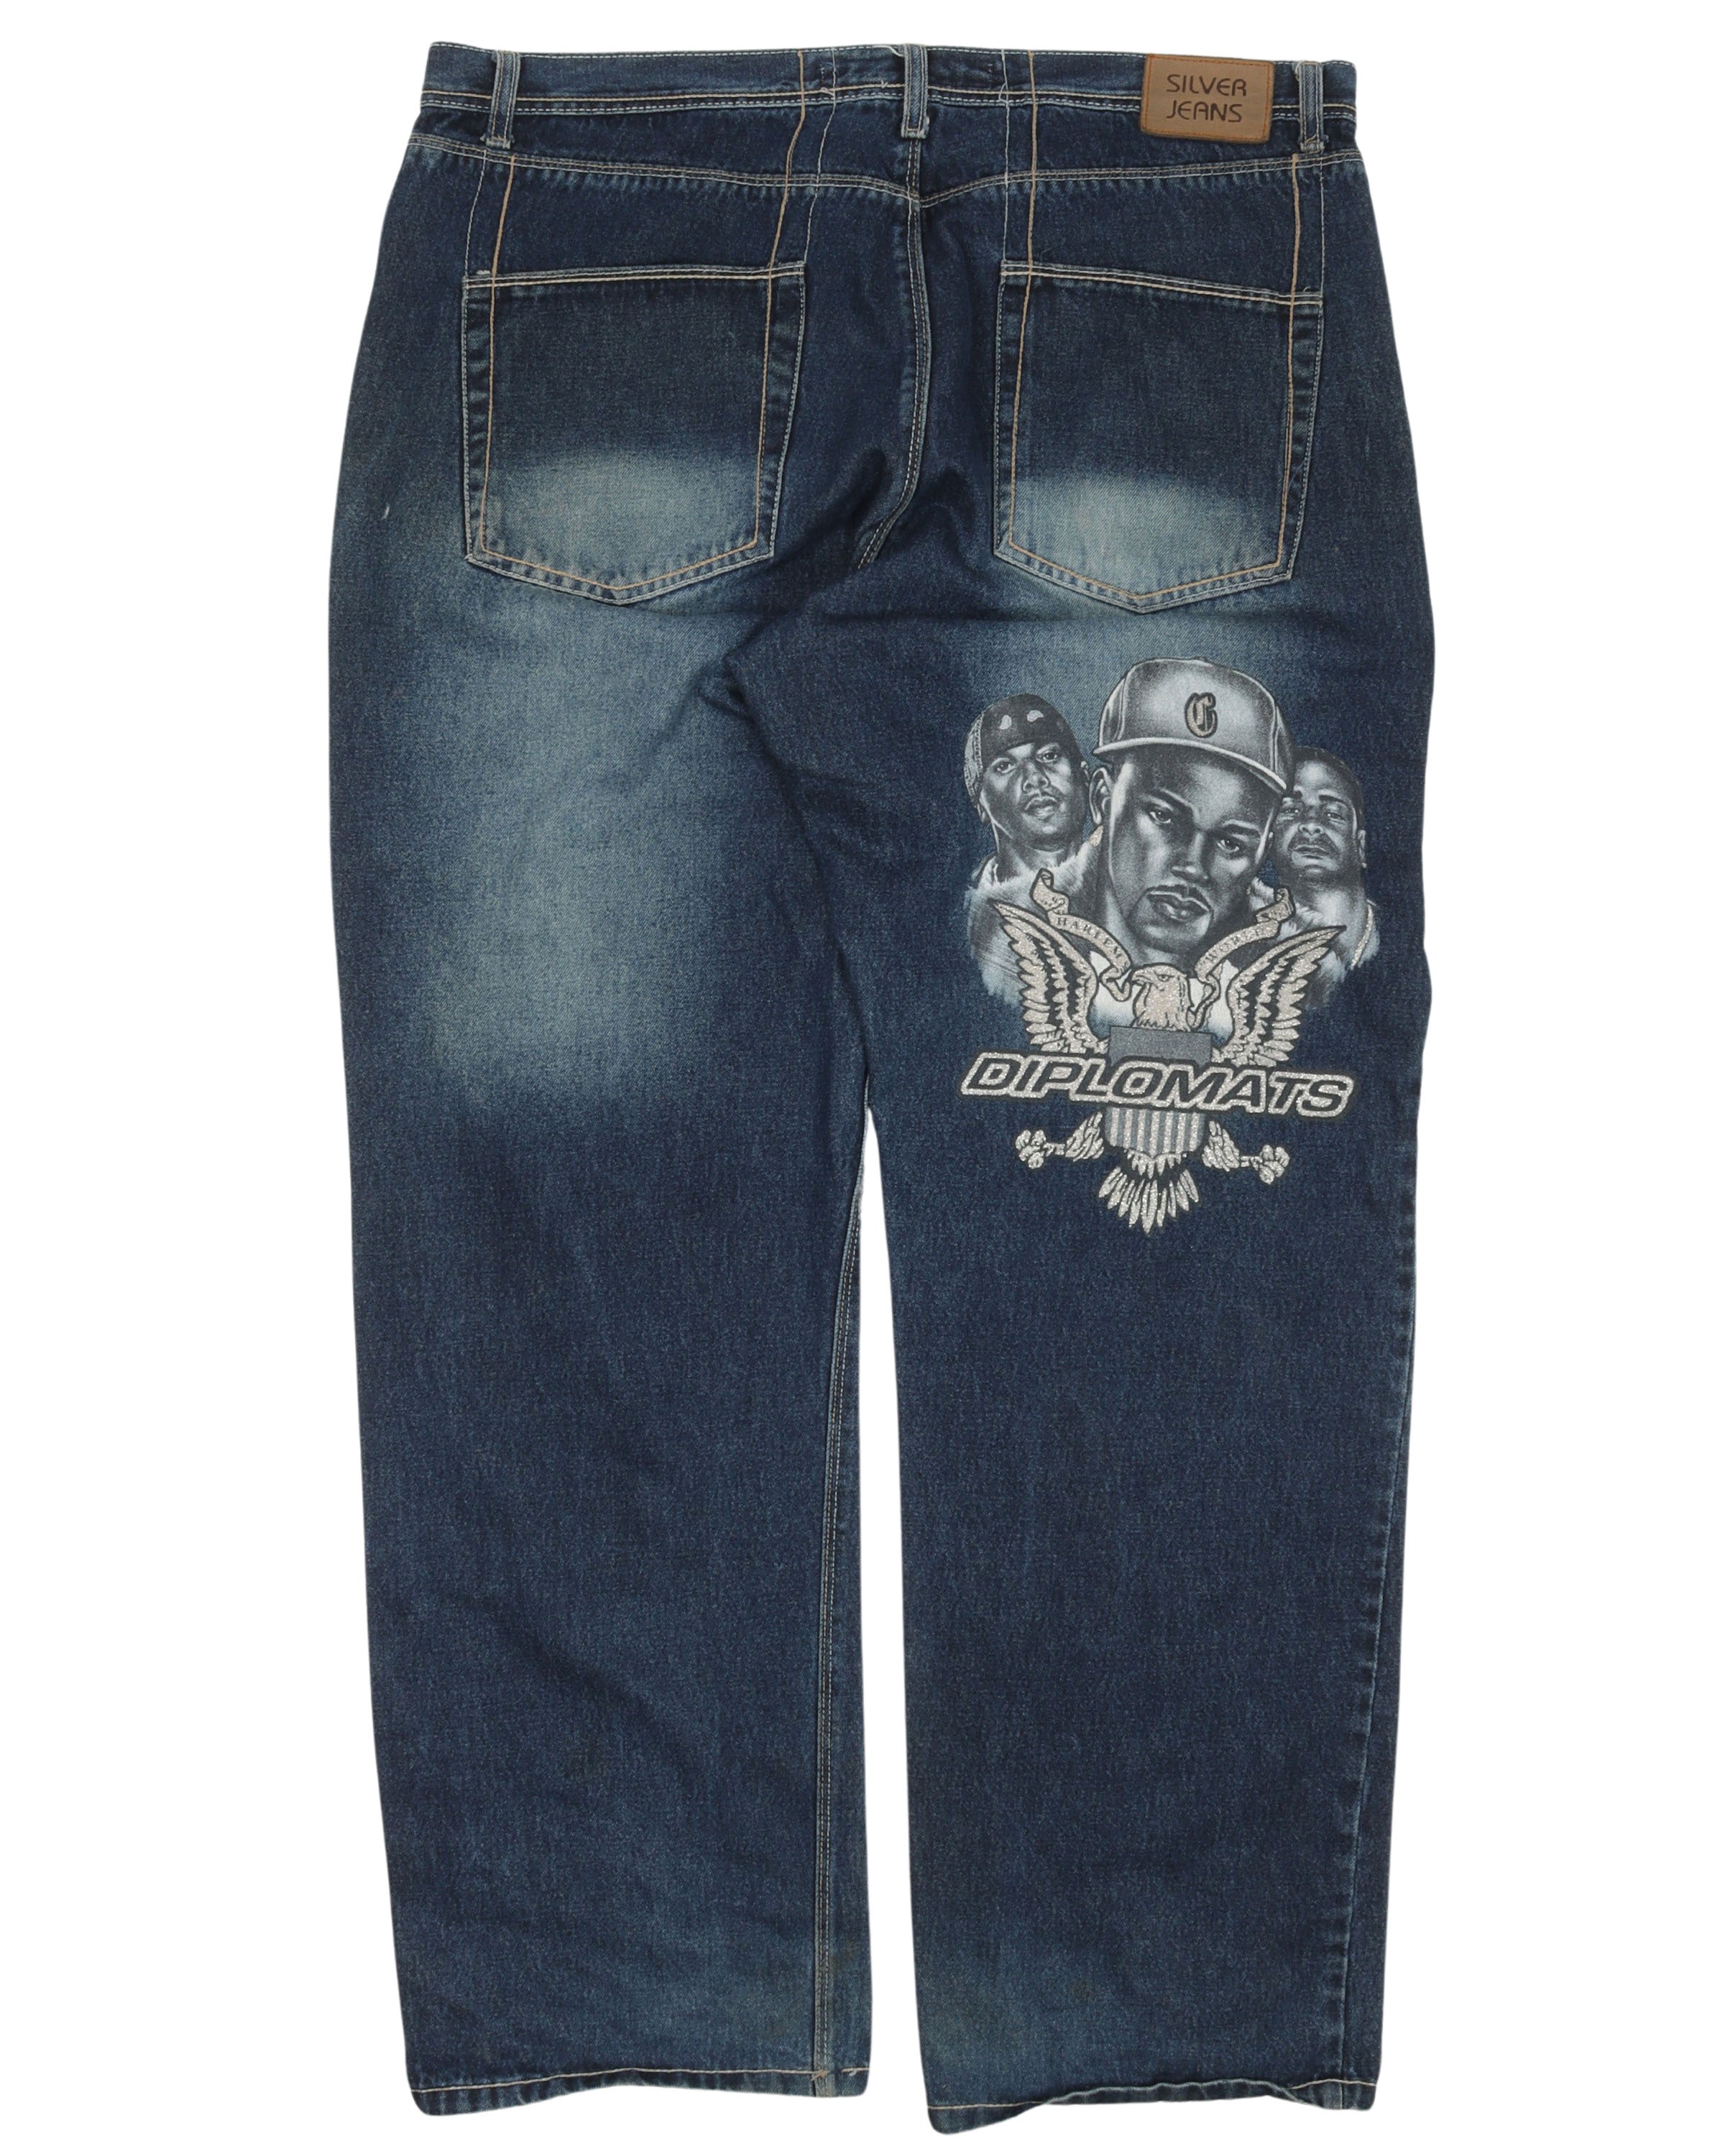 Diplomats Graphic Jeans